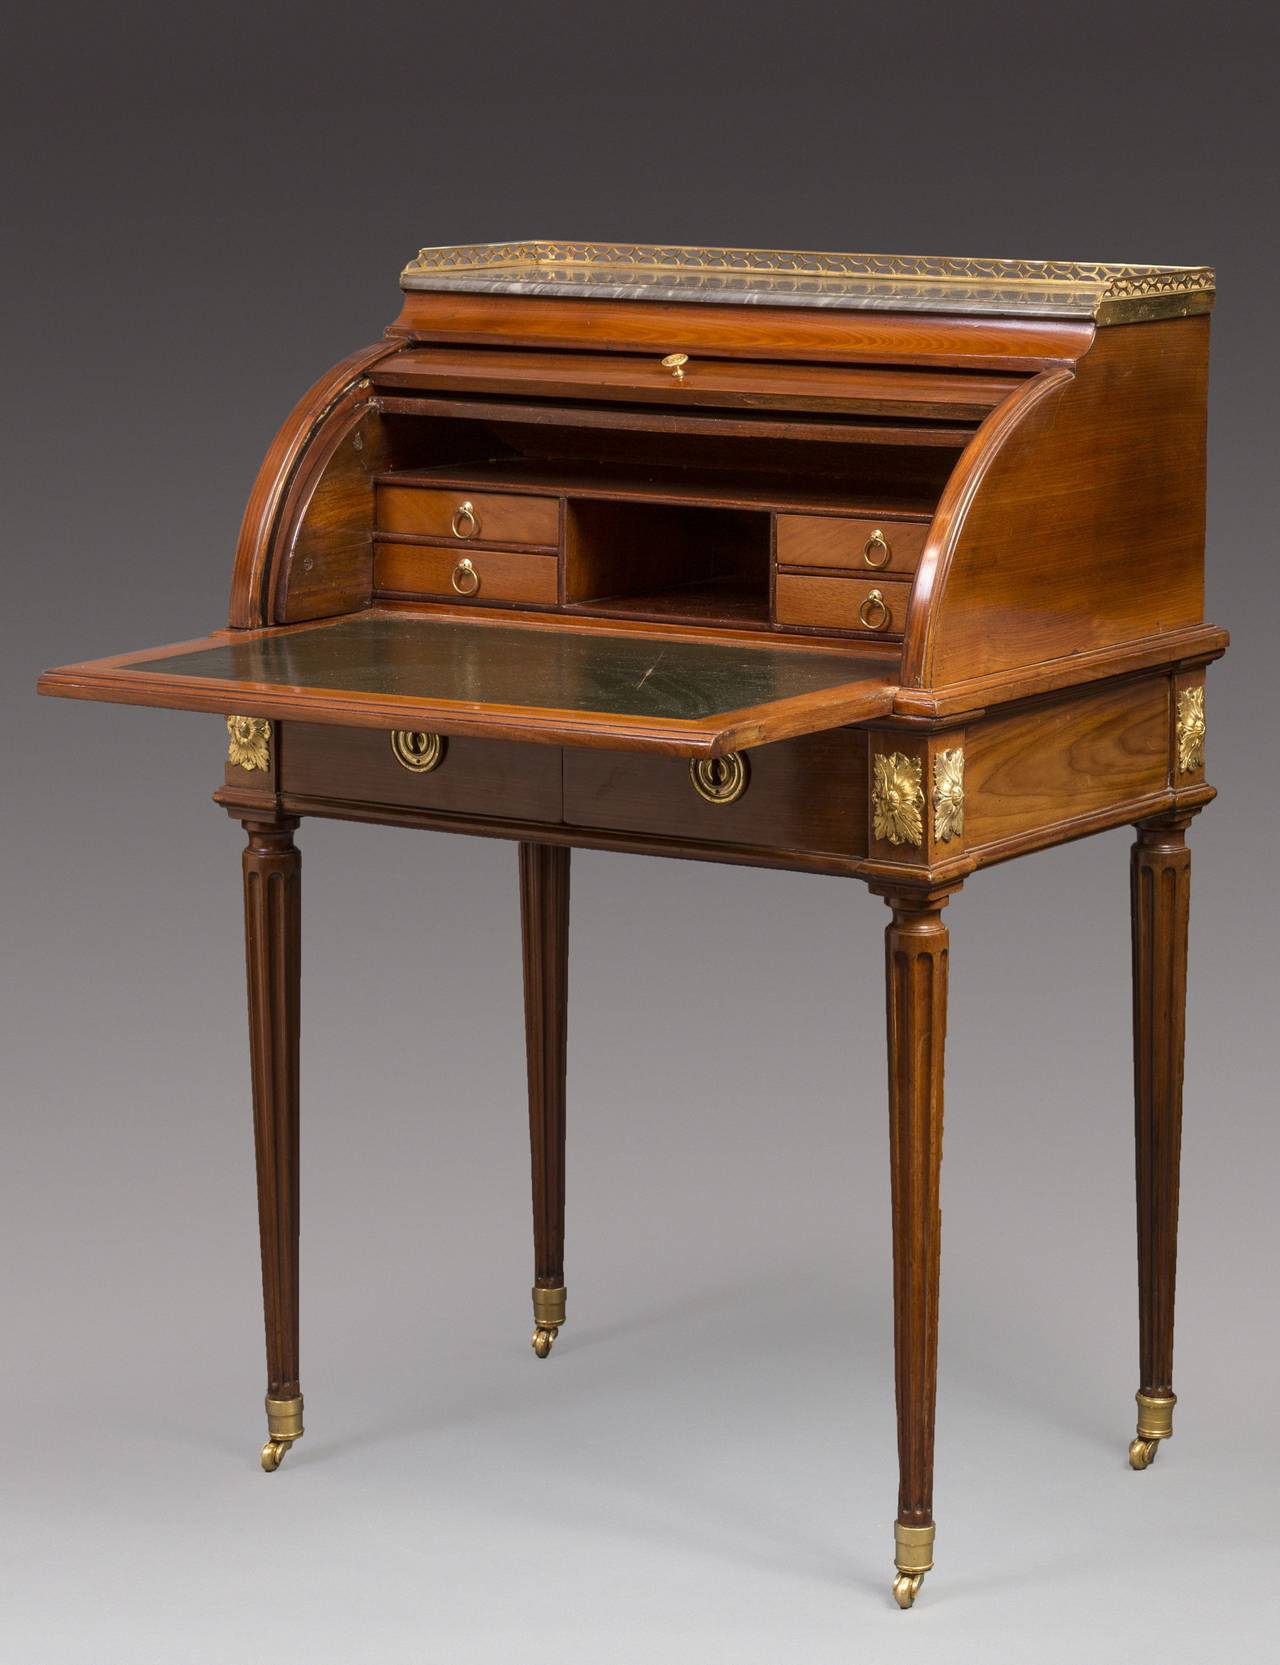 The recessed bleu turquin rectangular marble top with a three-quarter pierced gallery, above a cylinder rising to reveal a fitted interior with open compartments above and in between four drawers, with a pull-out sliding leather-lined writing